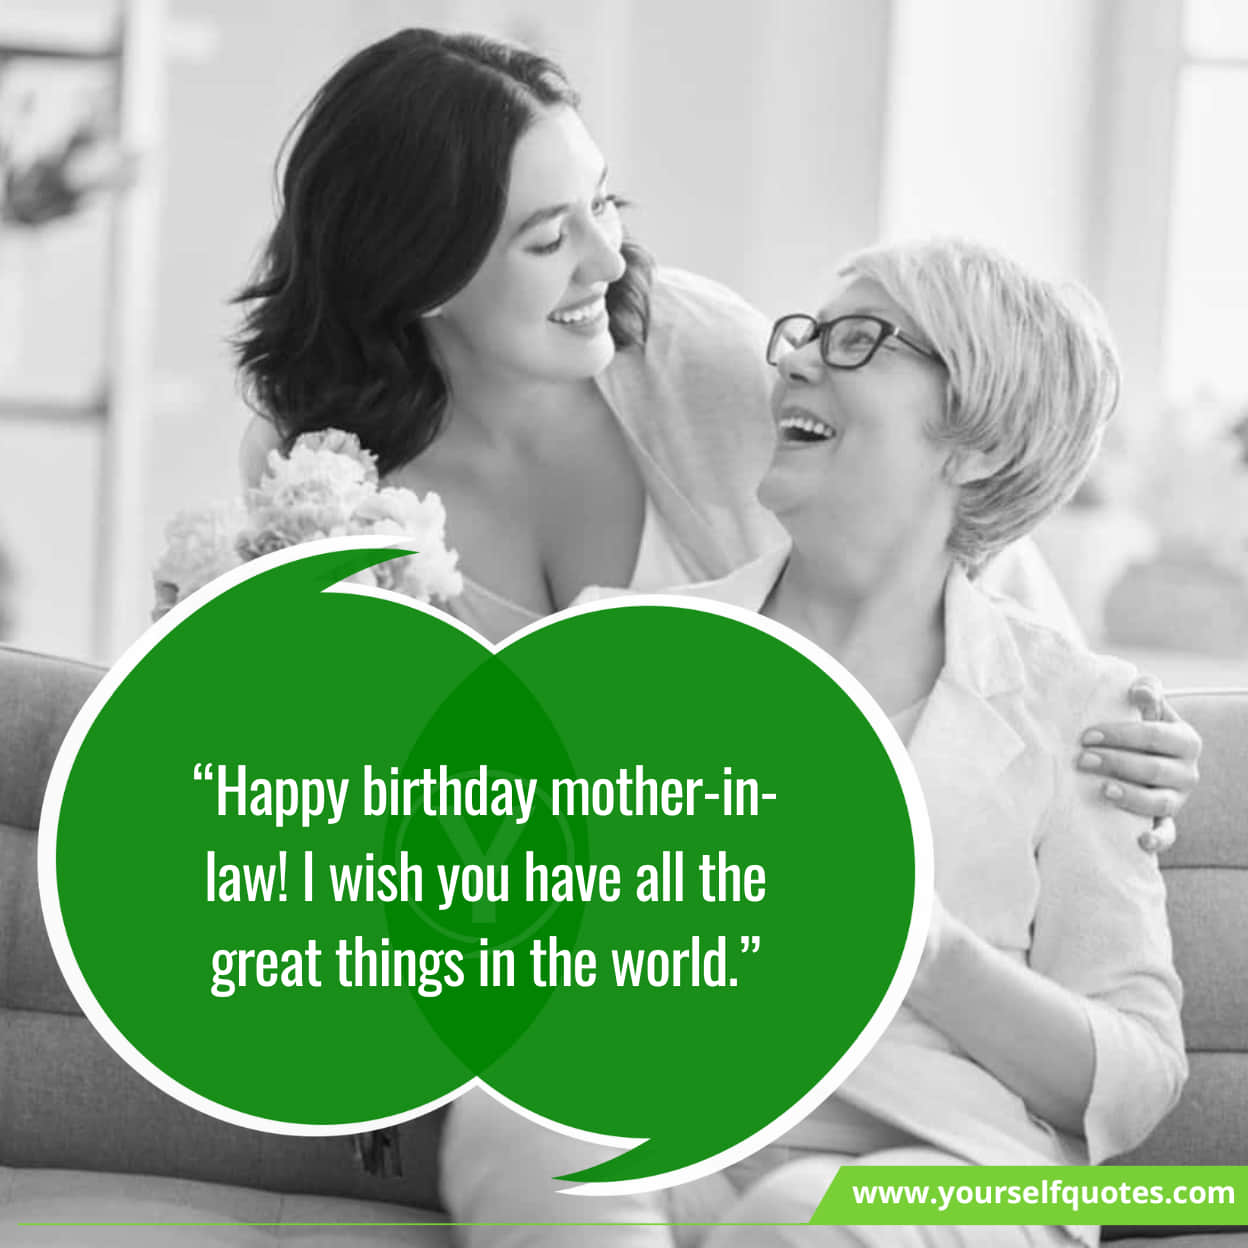 Alluring Heart-warming Birthday Wishes for Mother in Law